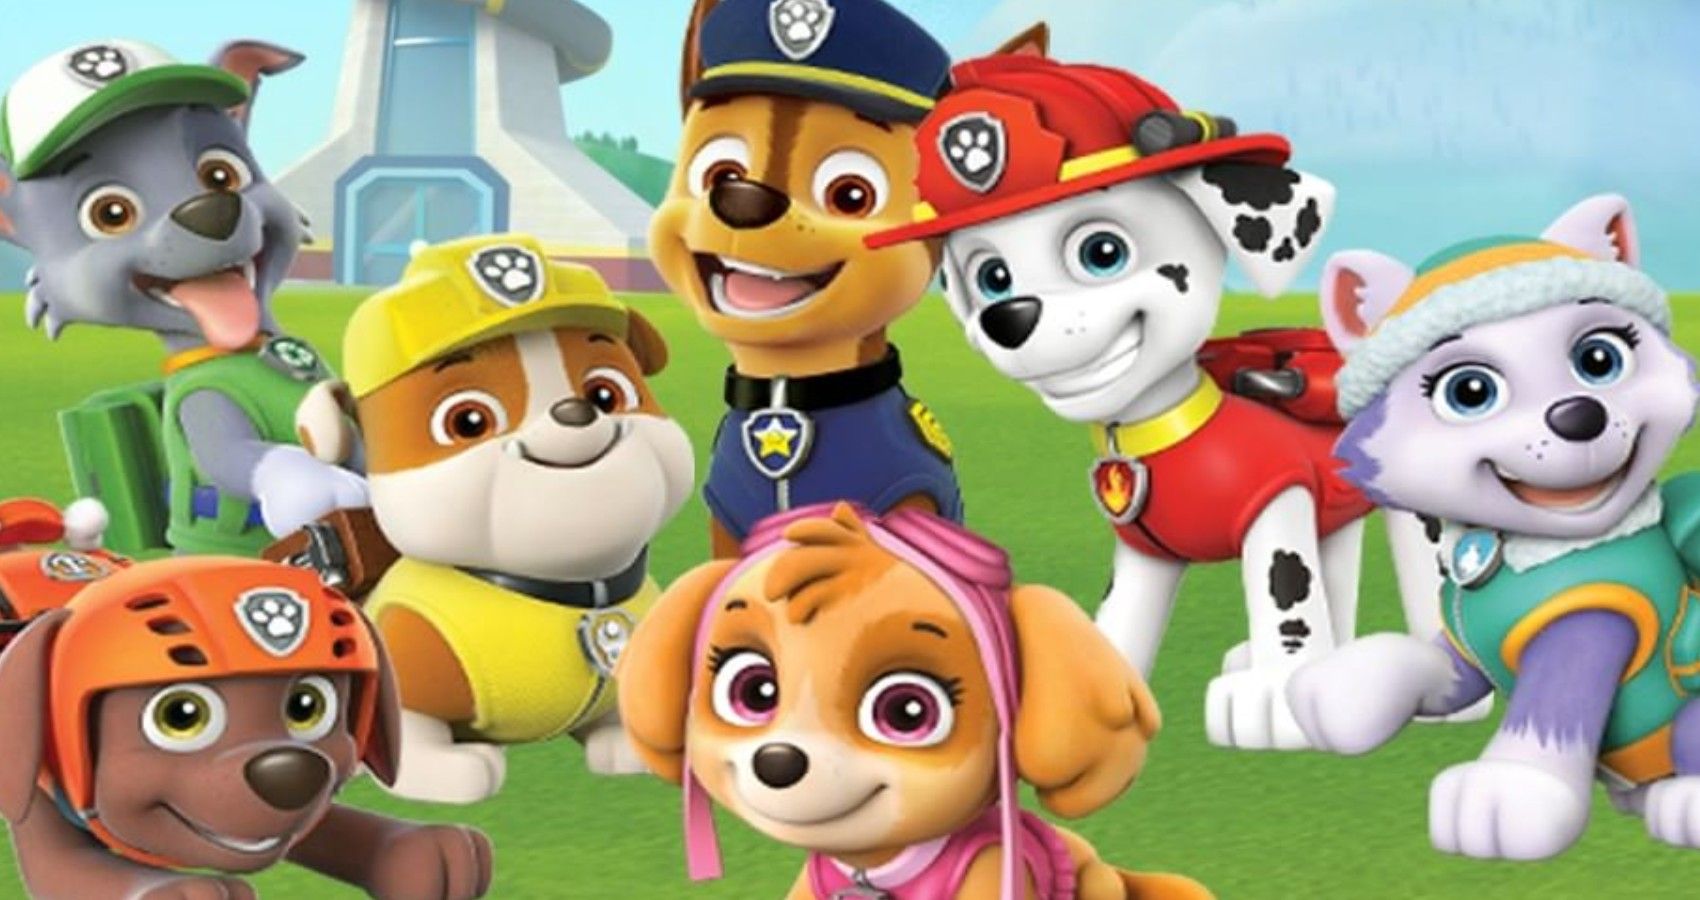 The Pups From Paw Patrol